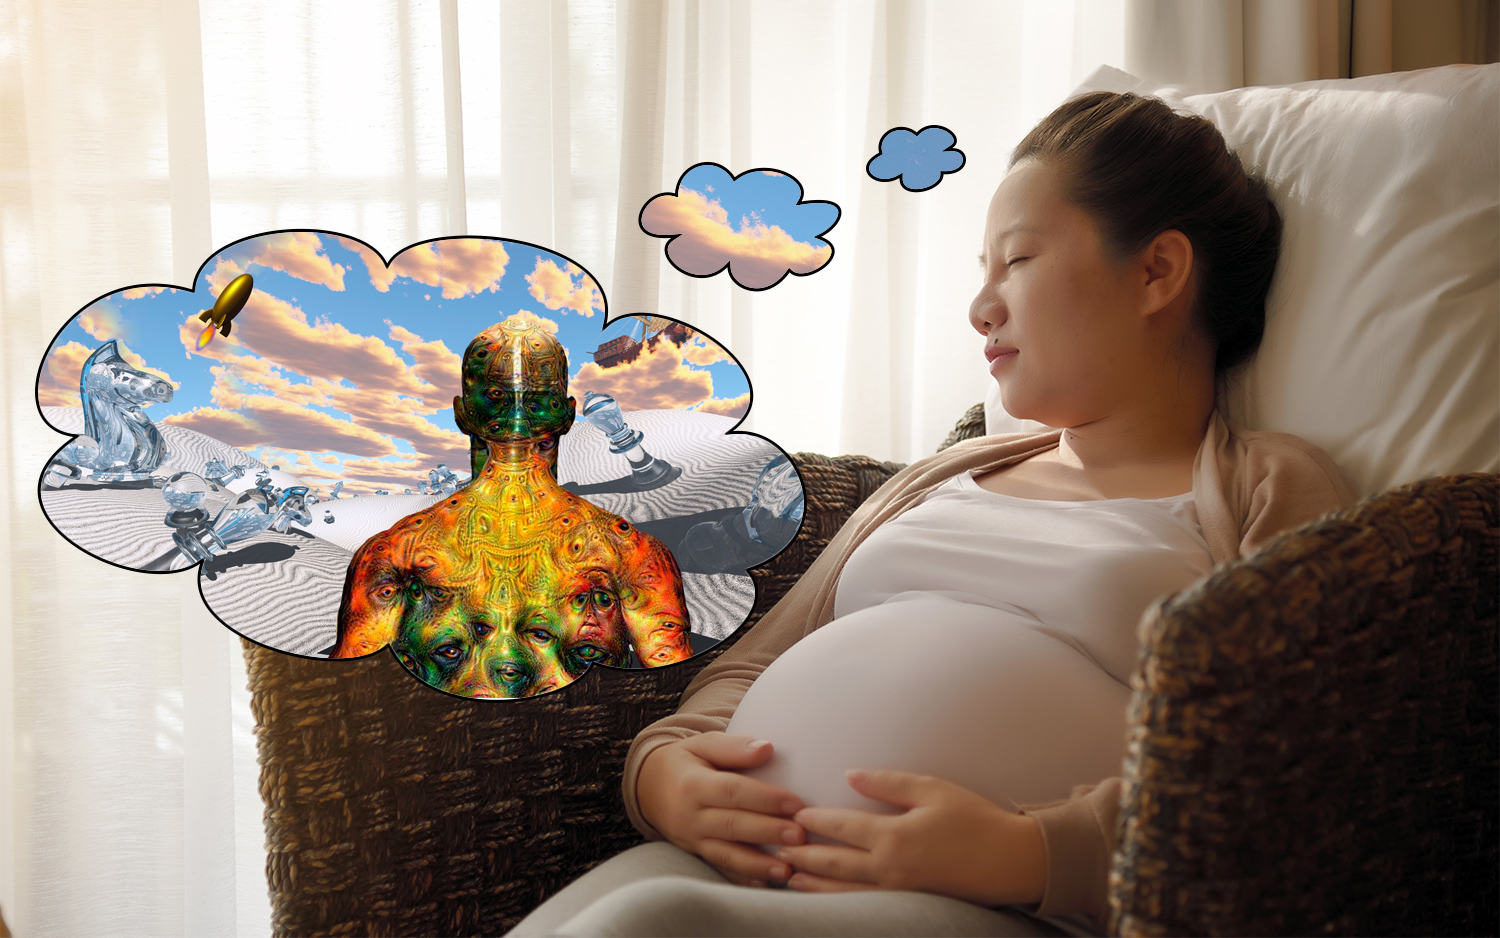 Why Does Pregnancy Cause Weird Dreams? | Live Science